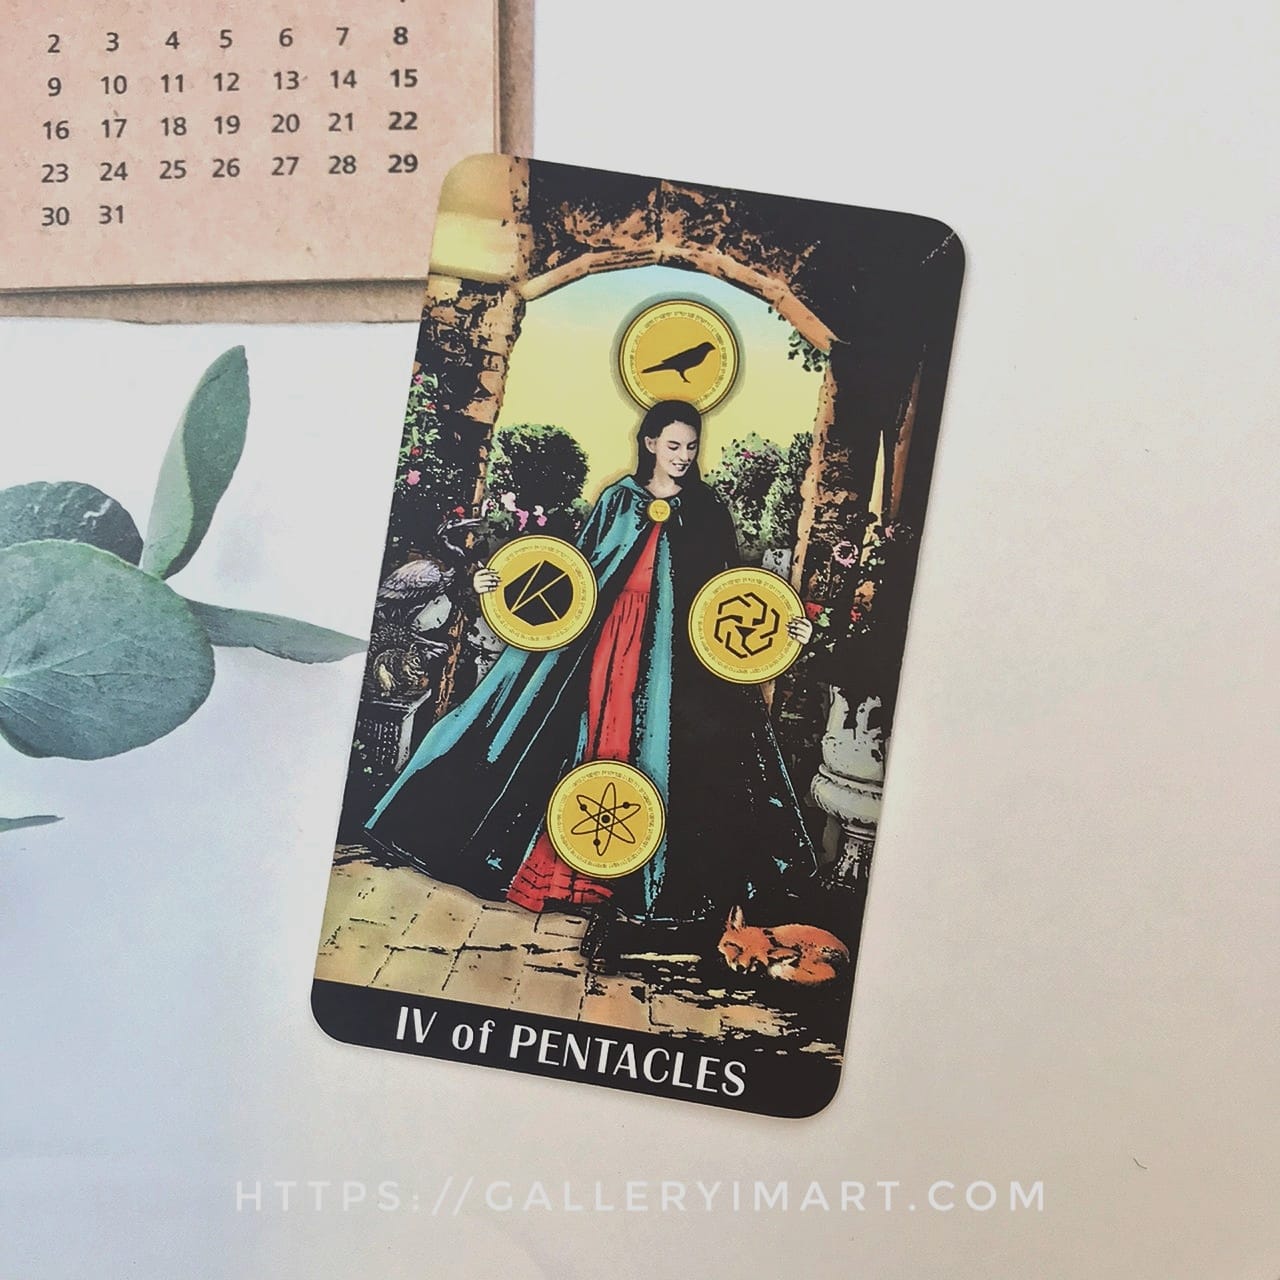 Four of Pentacles Meaning